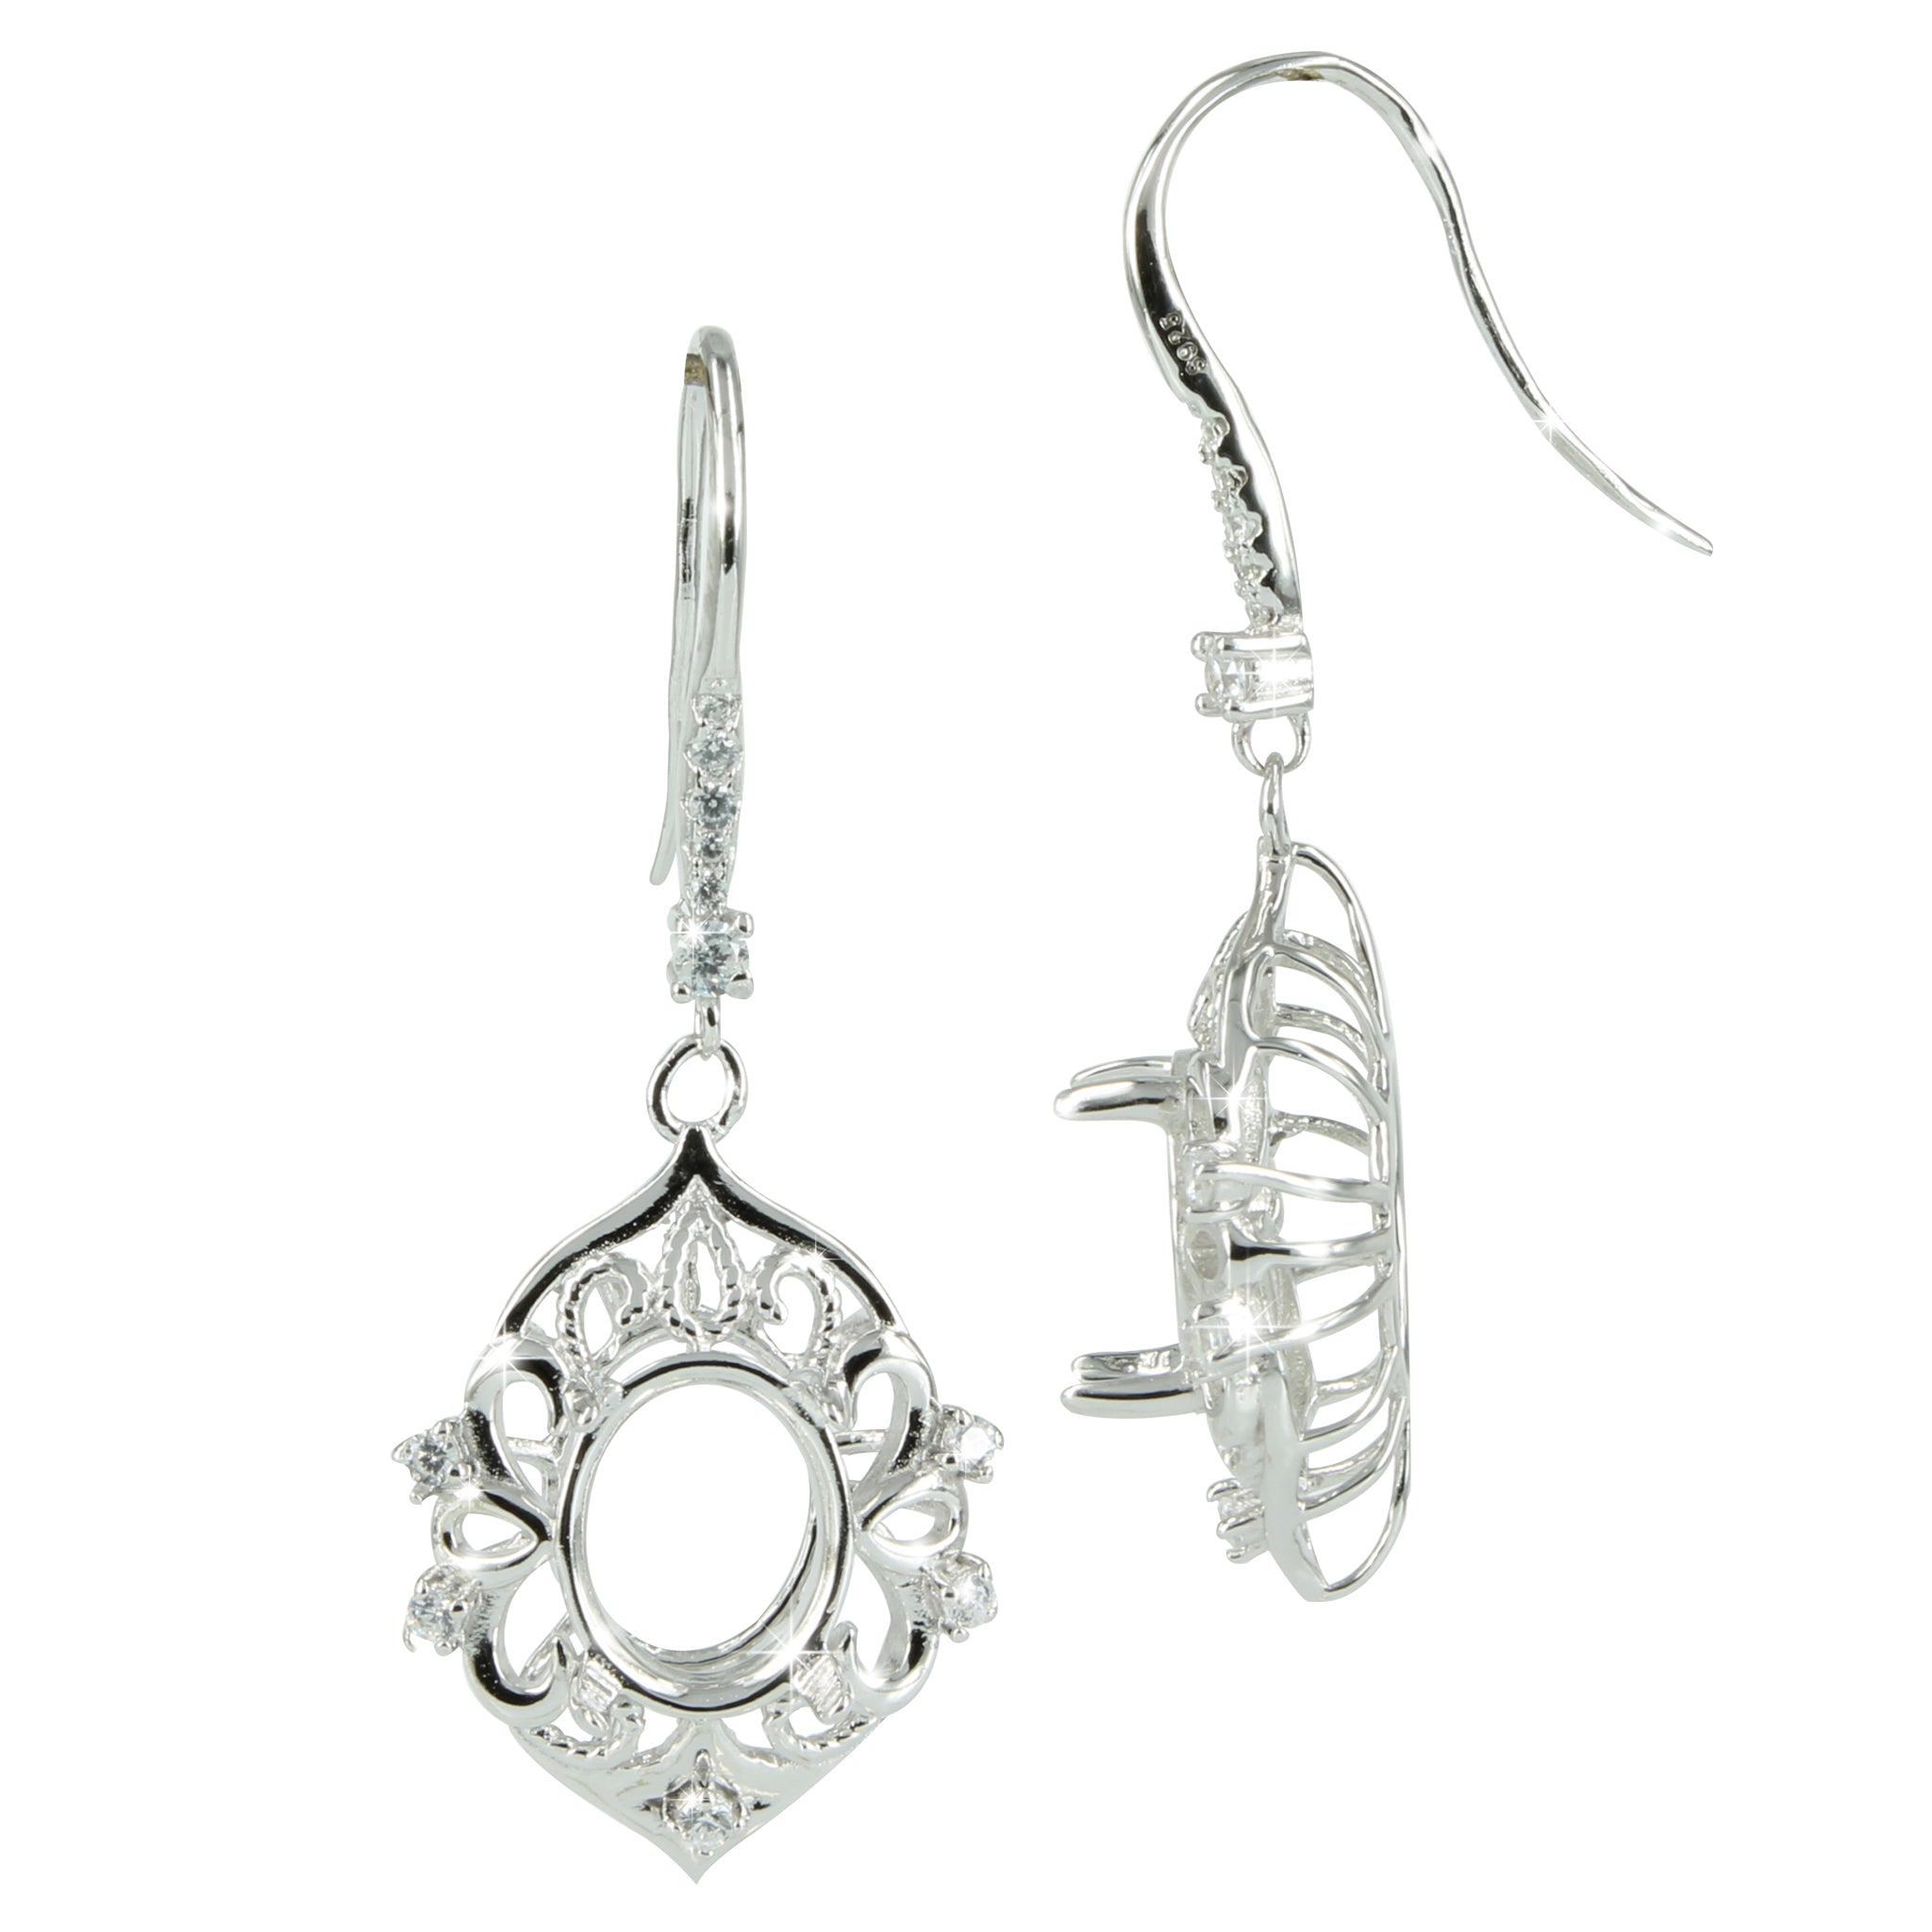 Victorian Rococo Earrings with Oval Setting in Sterling Silver for 8x10mm Oval Stones